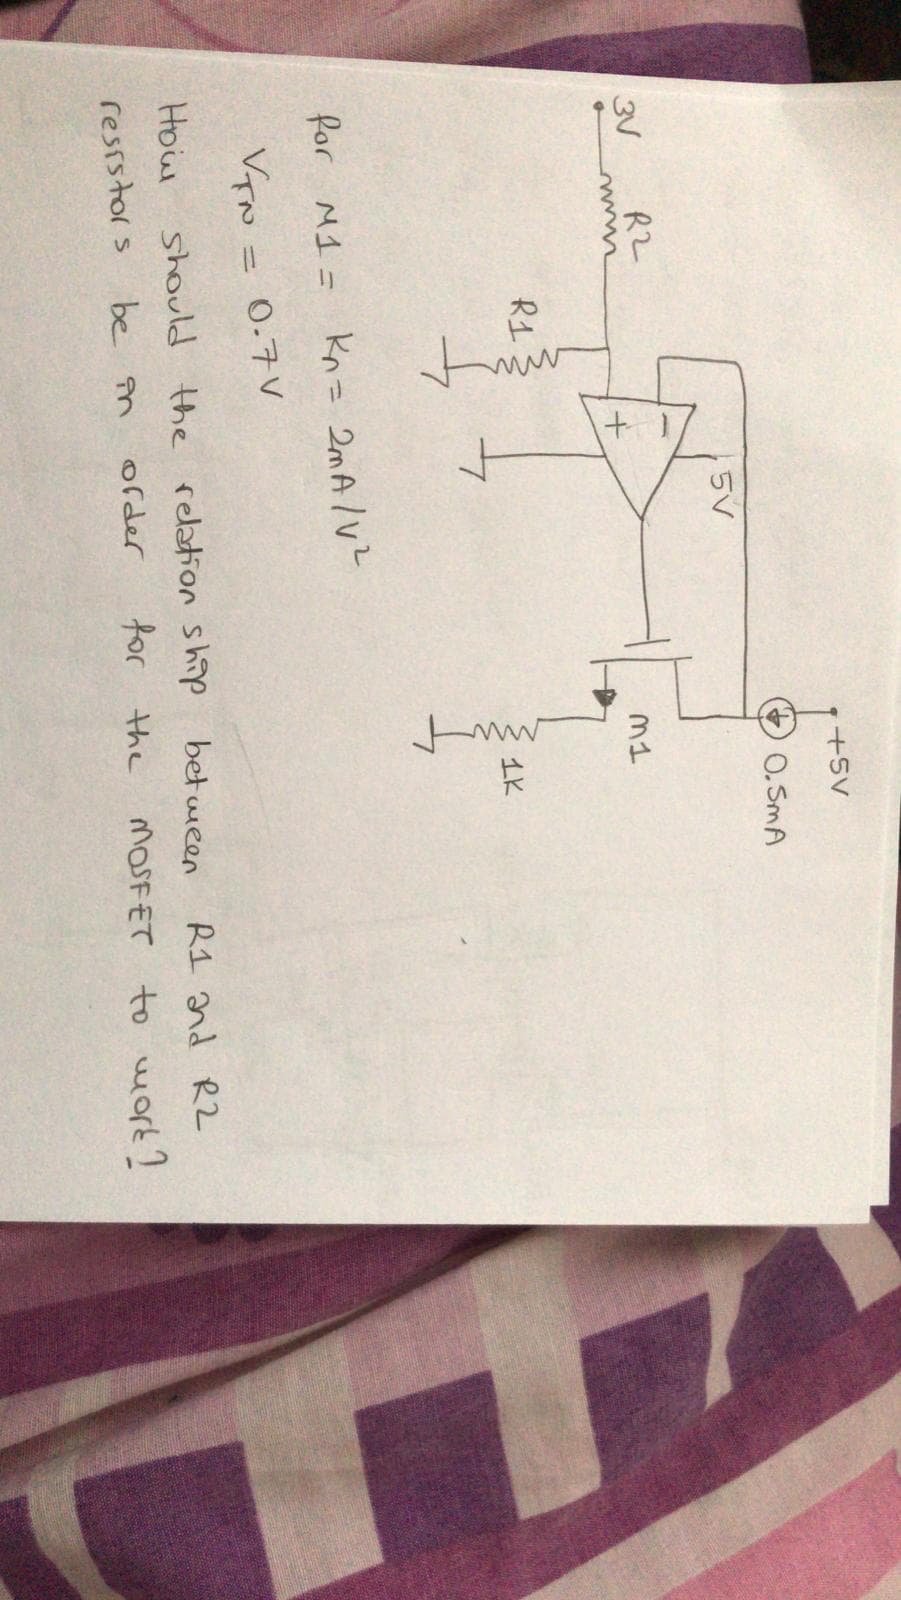 +5V
O. SmA
5V
3V
R2
m1
R1
1K
for M1 = kn= 2mAlVZ
0.7V
%3D
should the relation ship bet ween
for the
How
R1 and R2
be în
MOSFET to ork?
resistors
order
